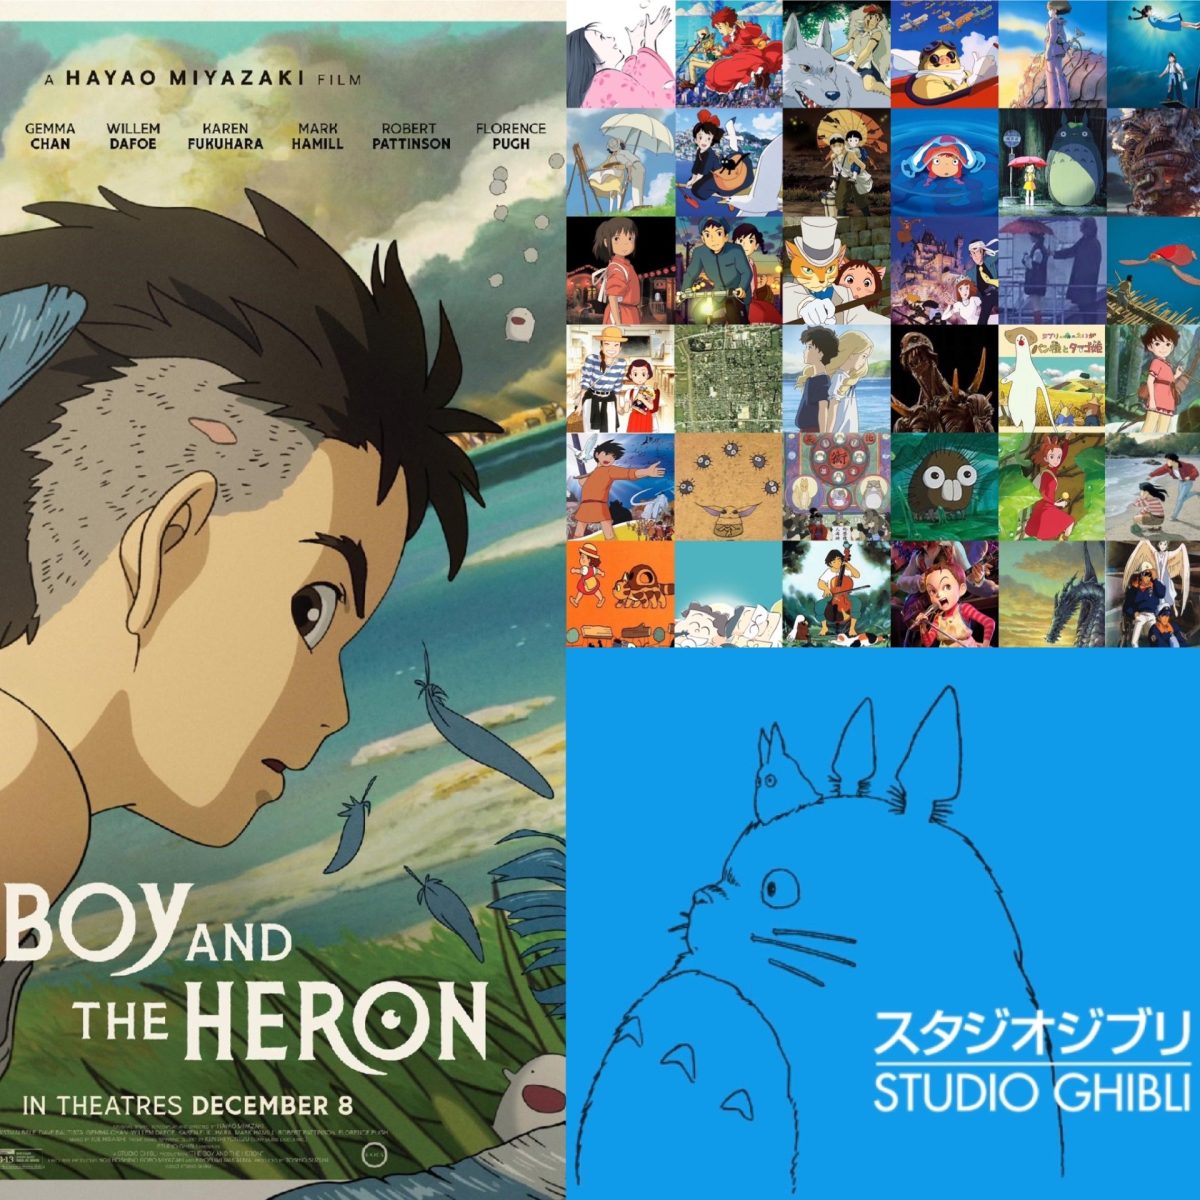 Erik+At+The+Movies%3A+The+Complete+Studio+Ghibli+Rankings